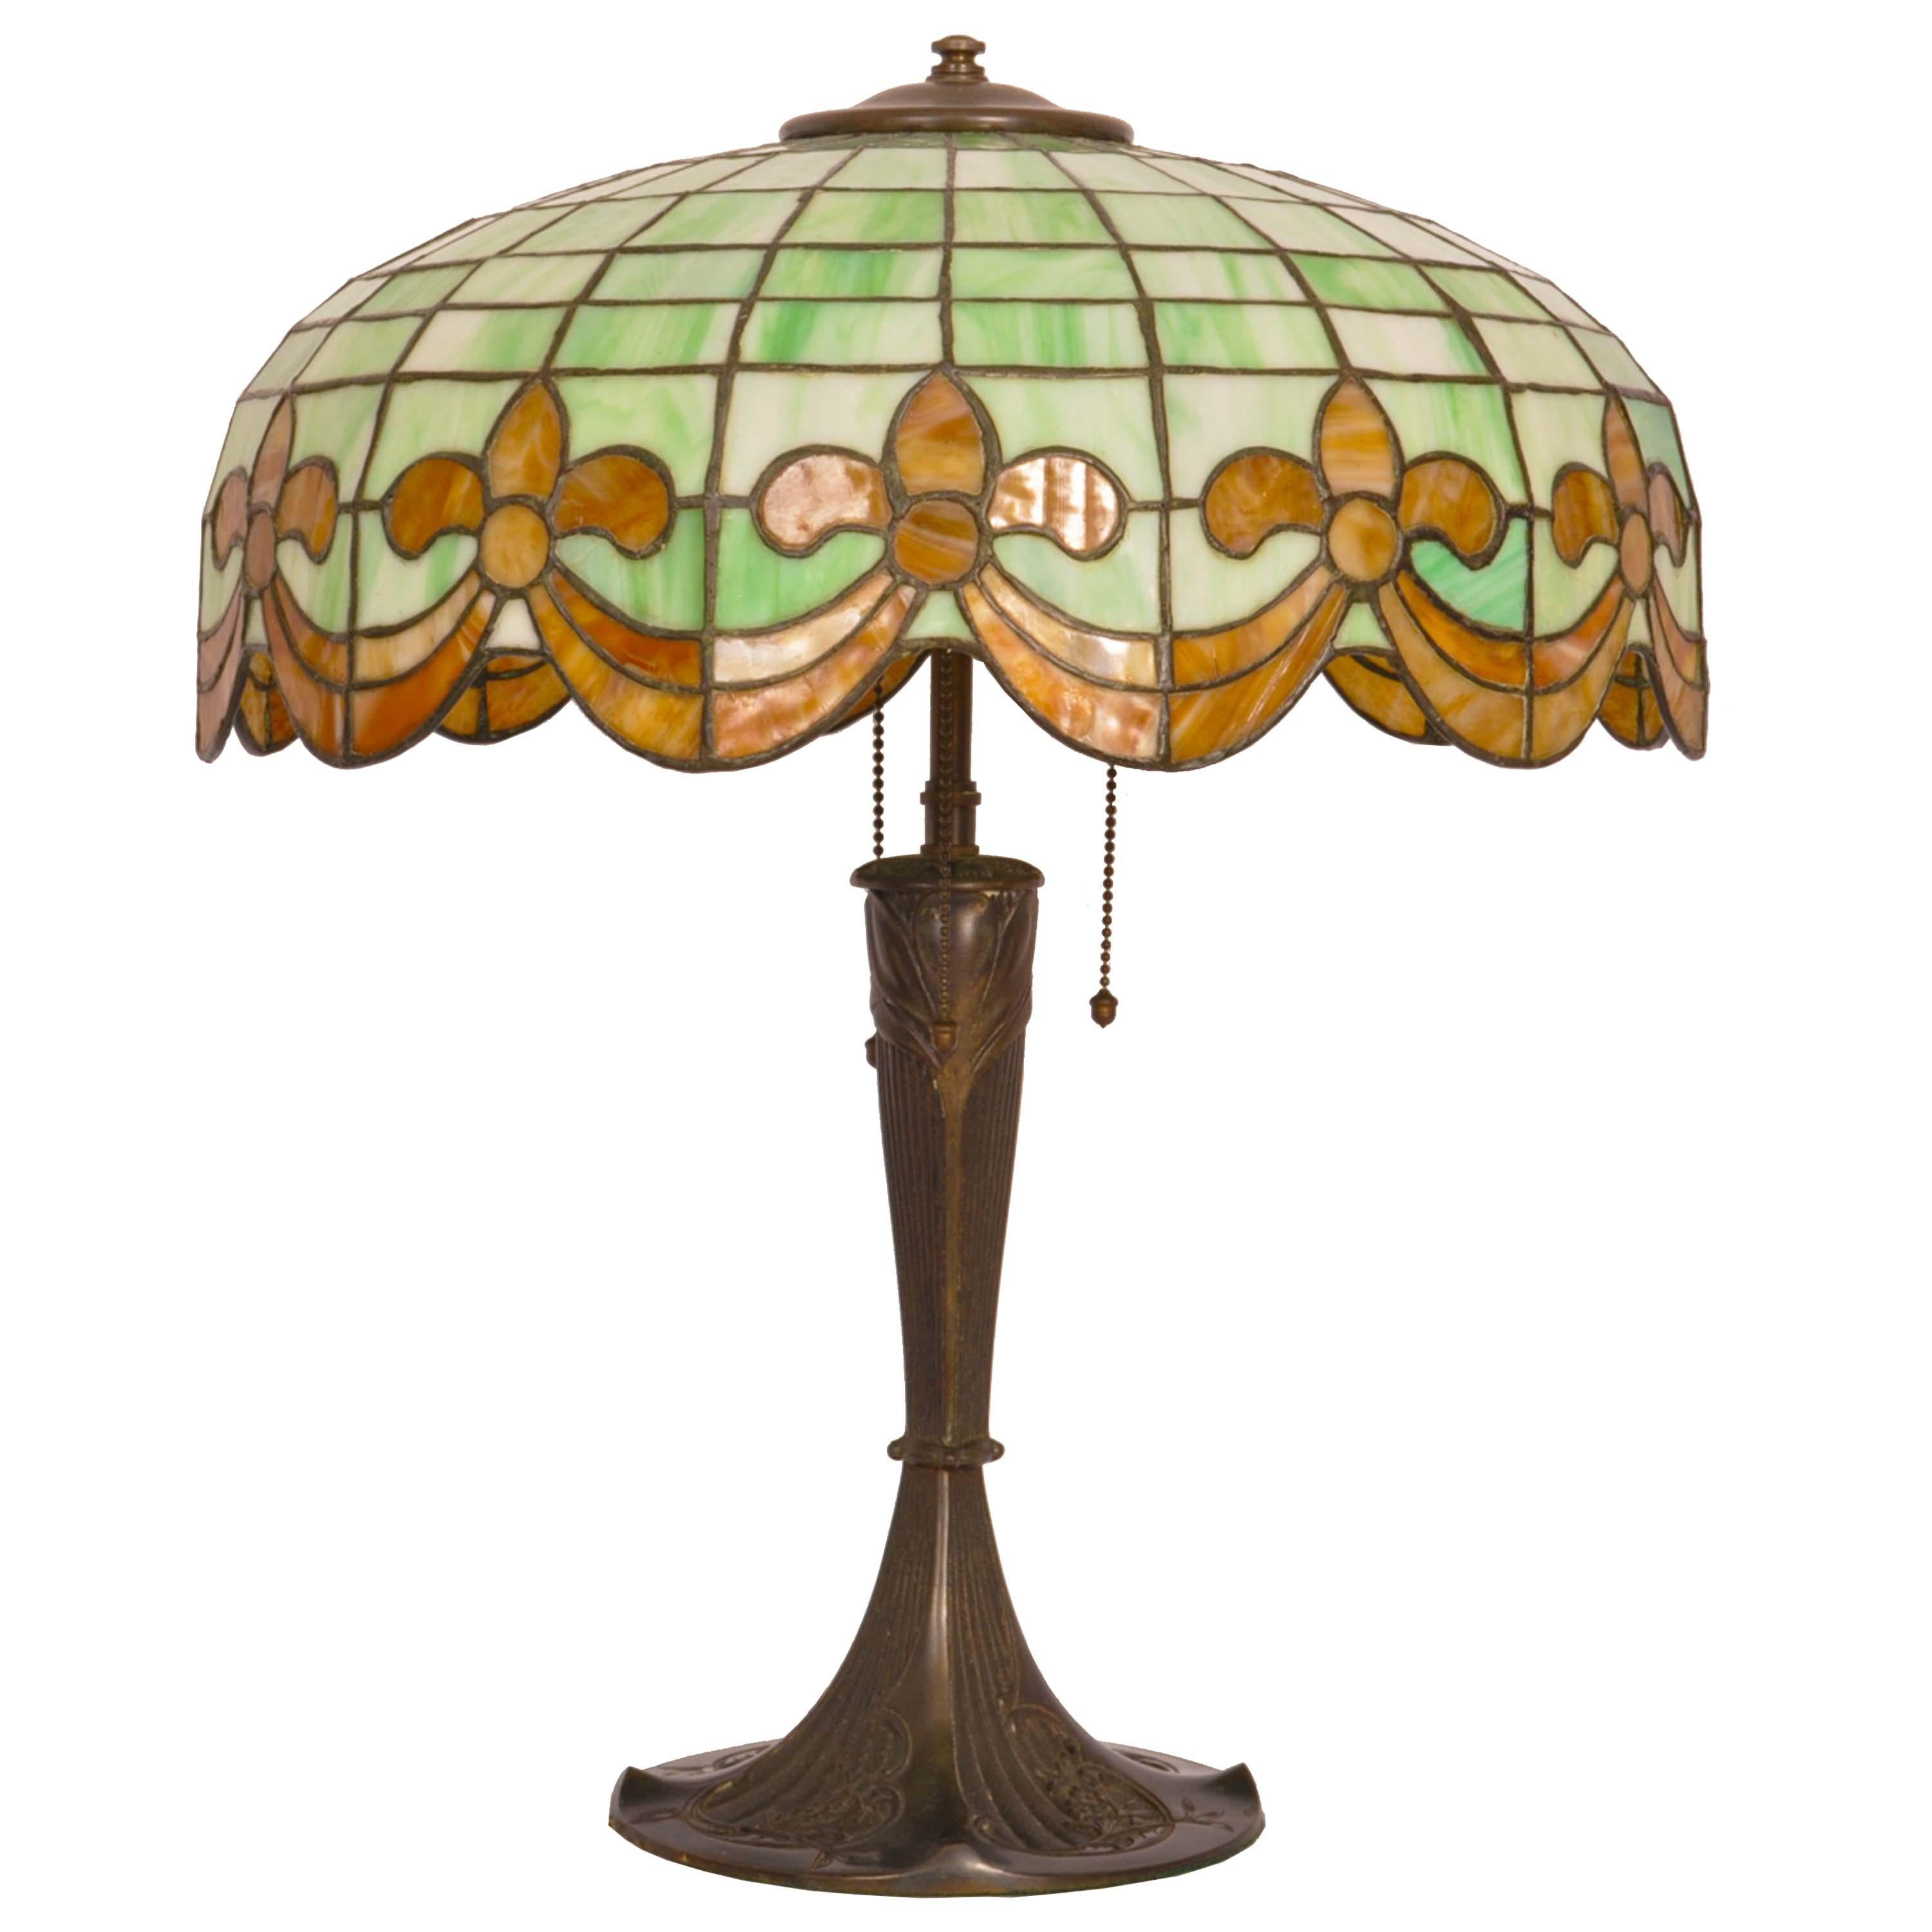 Antique American bronze and leaded glass table lamp by Wilkinson, circa 1910.
The three light lamp having a dome shaped shade with striated leaded glass green & ivory tiles and having amber colored Fleur de Lys & swagged decoration to the base of